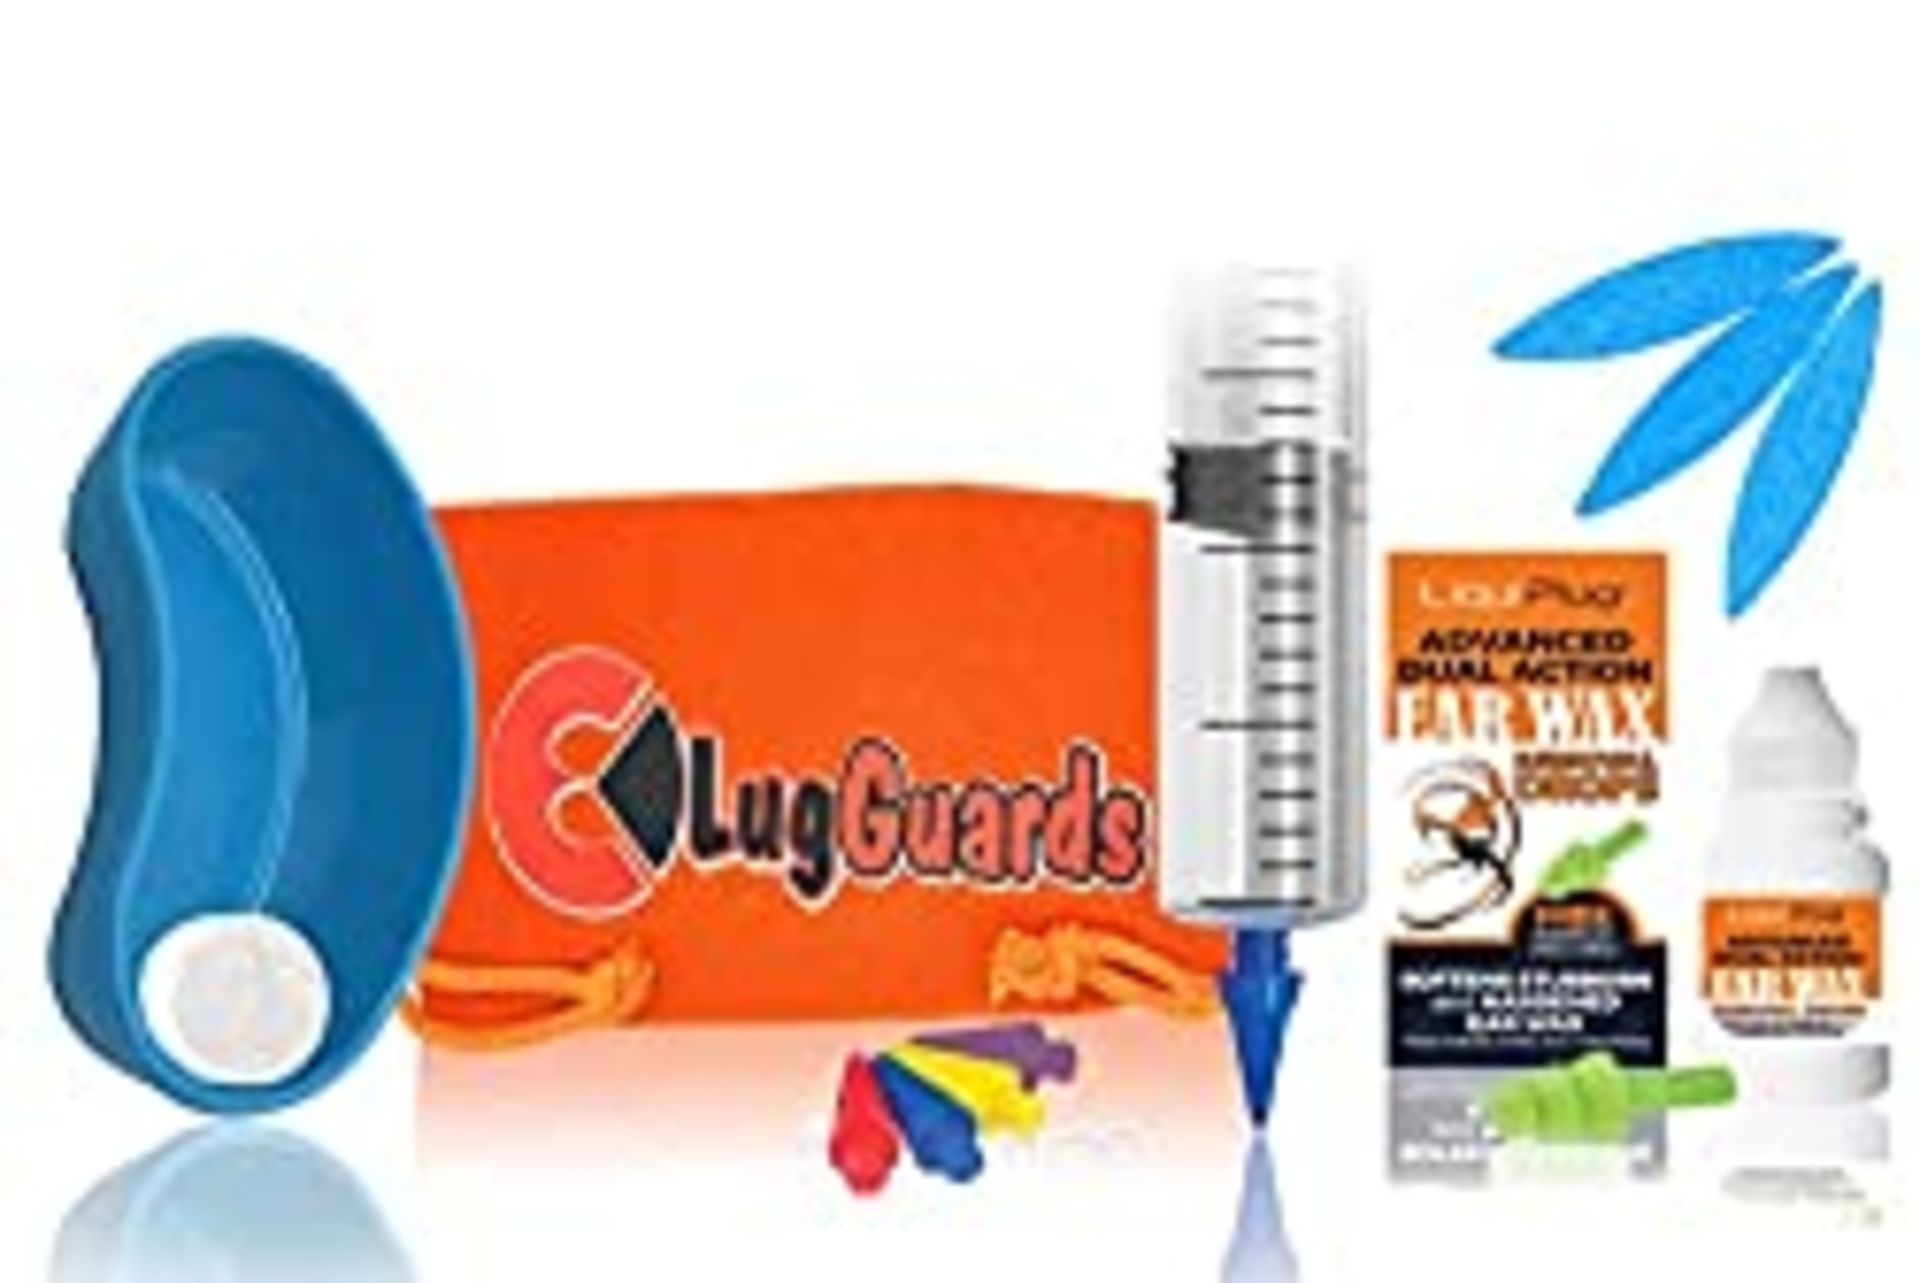 RRP £107.63 Total, Lot consisting of 6 items - See description. - Image 5 of 6